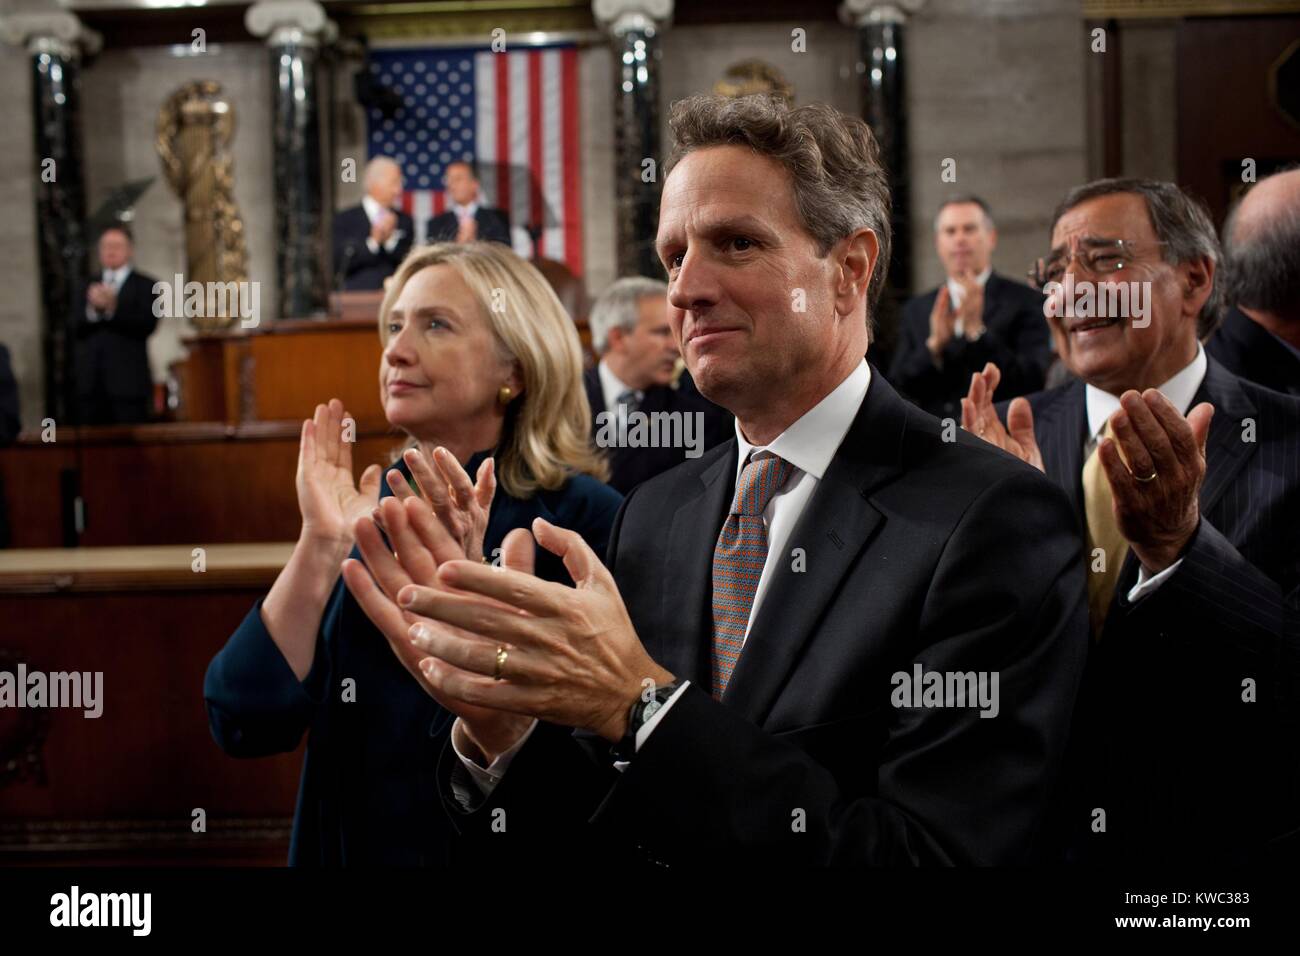 Senior Cabinet members applaud President Obama at the Capitol. L-R: Sec. of State Hillary Clinton; Treasury Sec. Timothy Geithner; and Defense Sec. Leon Panetta. Sept. 8, 2011. Obama addressed a Joint Session of Congress detailing the American Jobs Act. (BSLOC 2015 13 247) Stock Photo